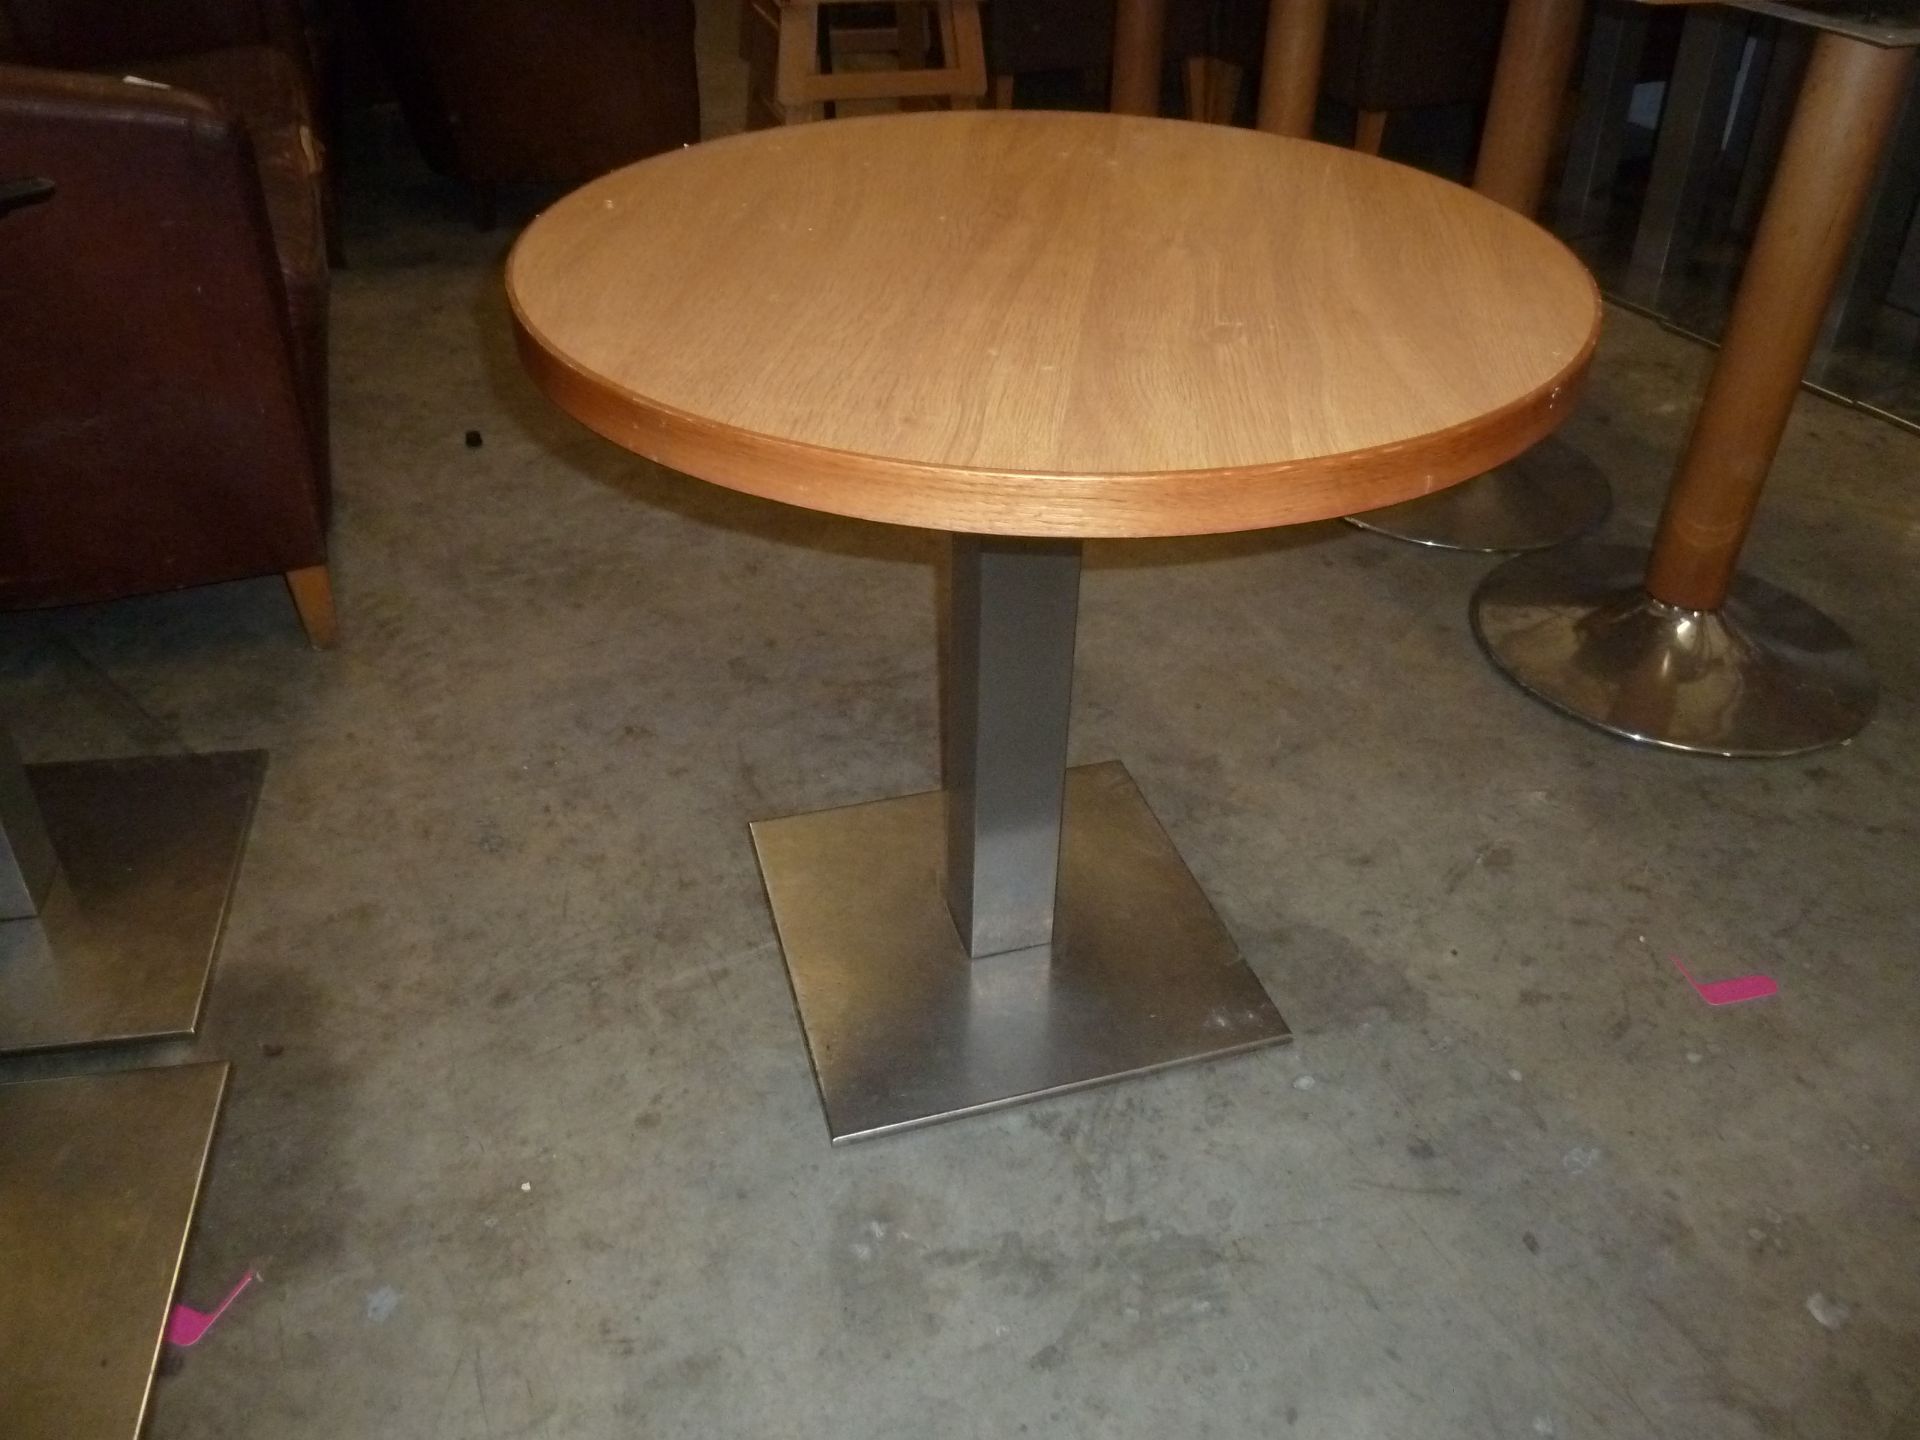 * 5 x round tables S/S square pedestal bases with wooden vaner tops. 700 diameter x 660h